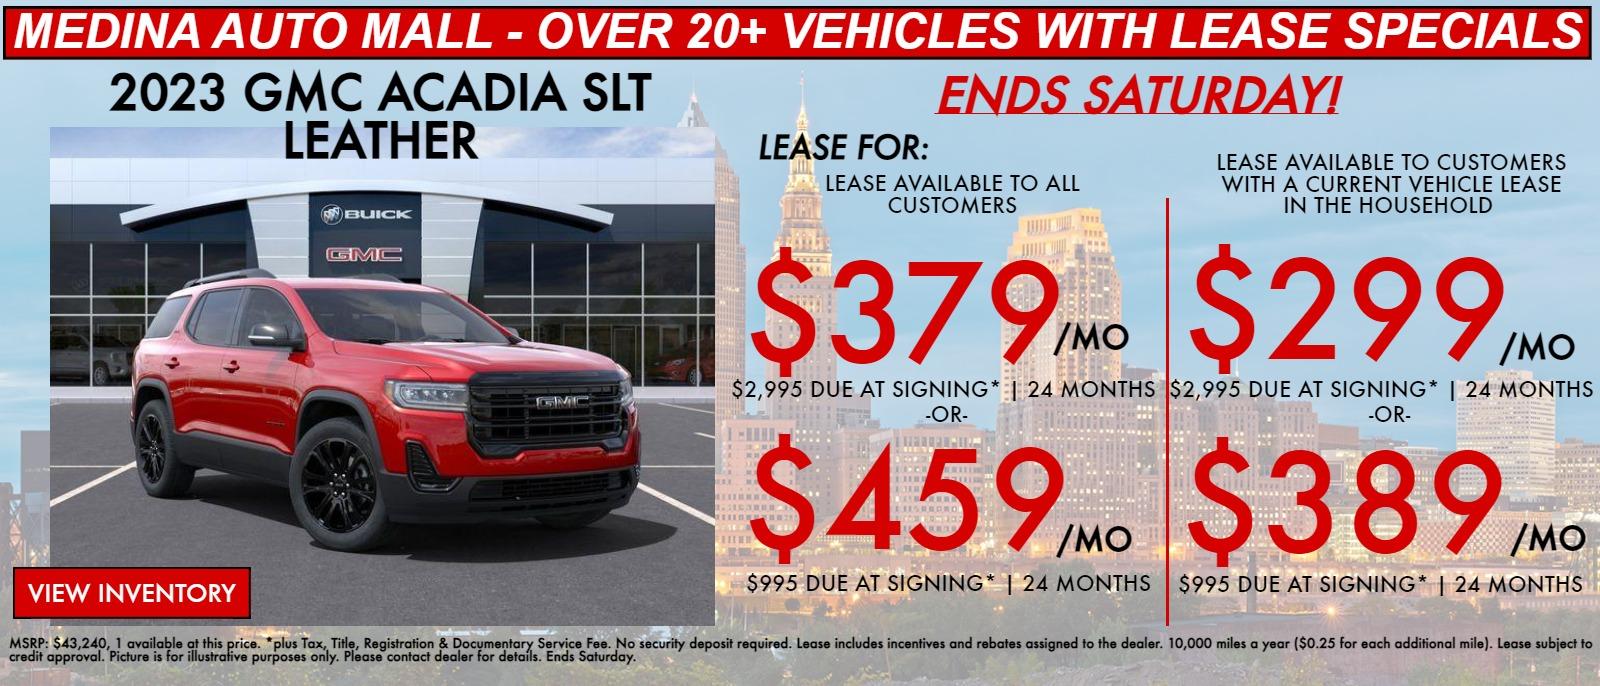 ACADIA lease special deals in Medina, OH